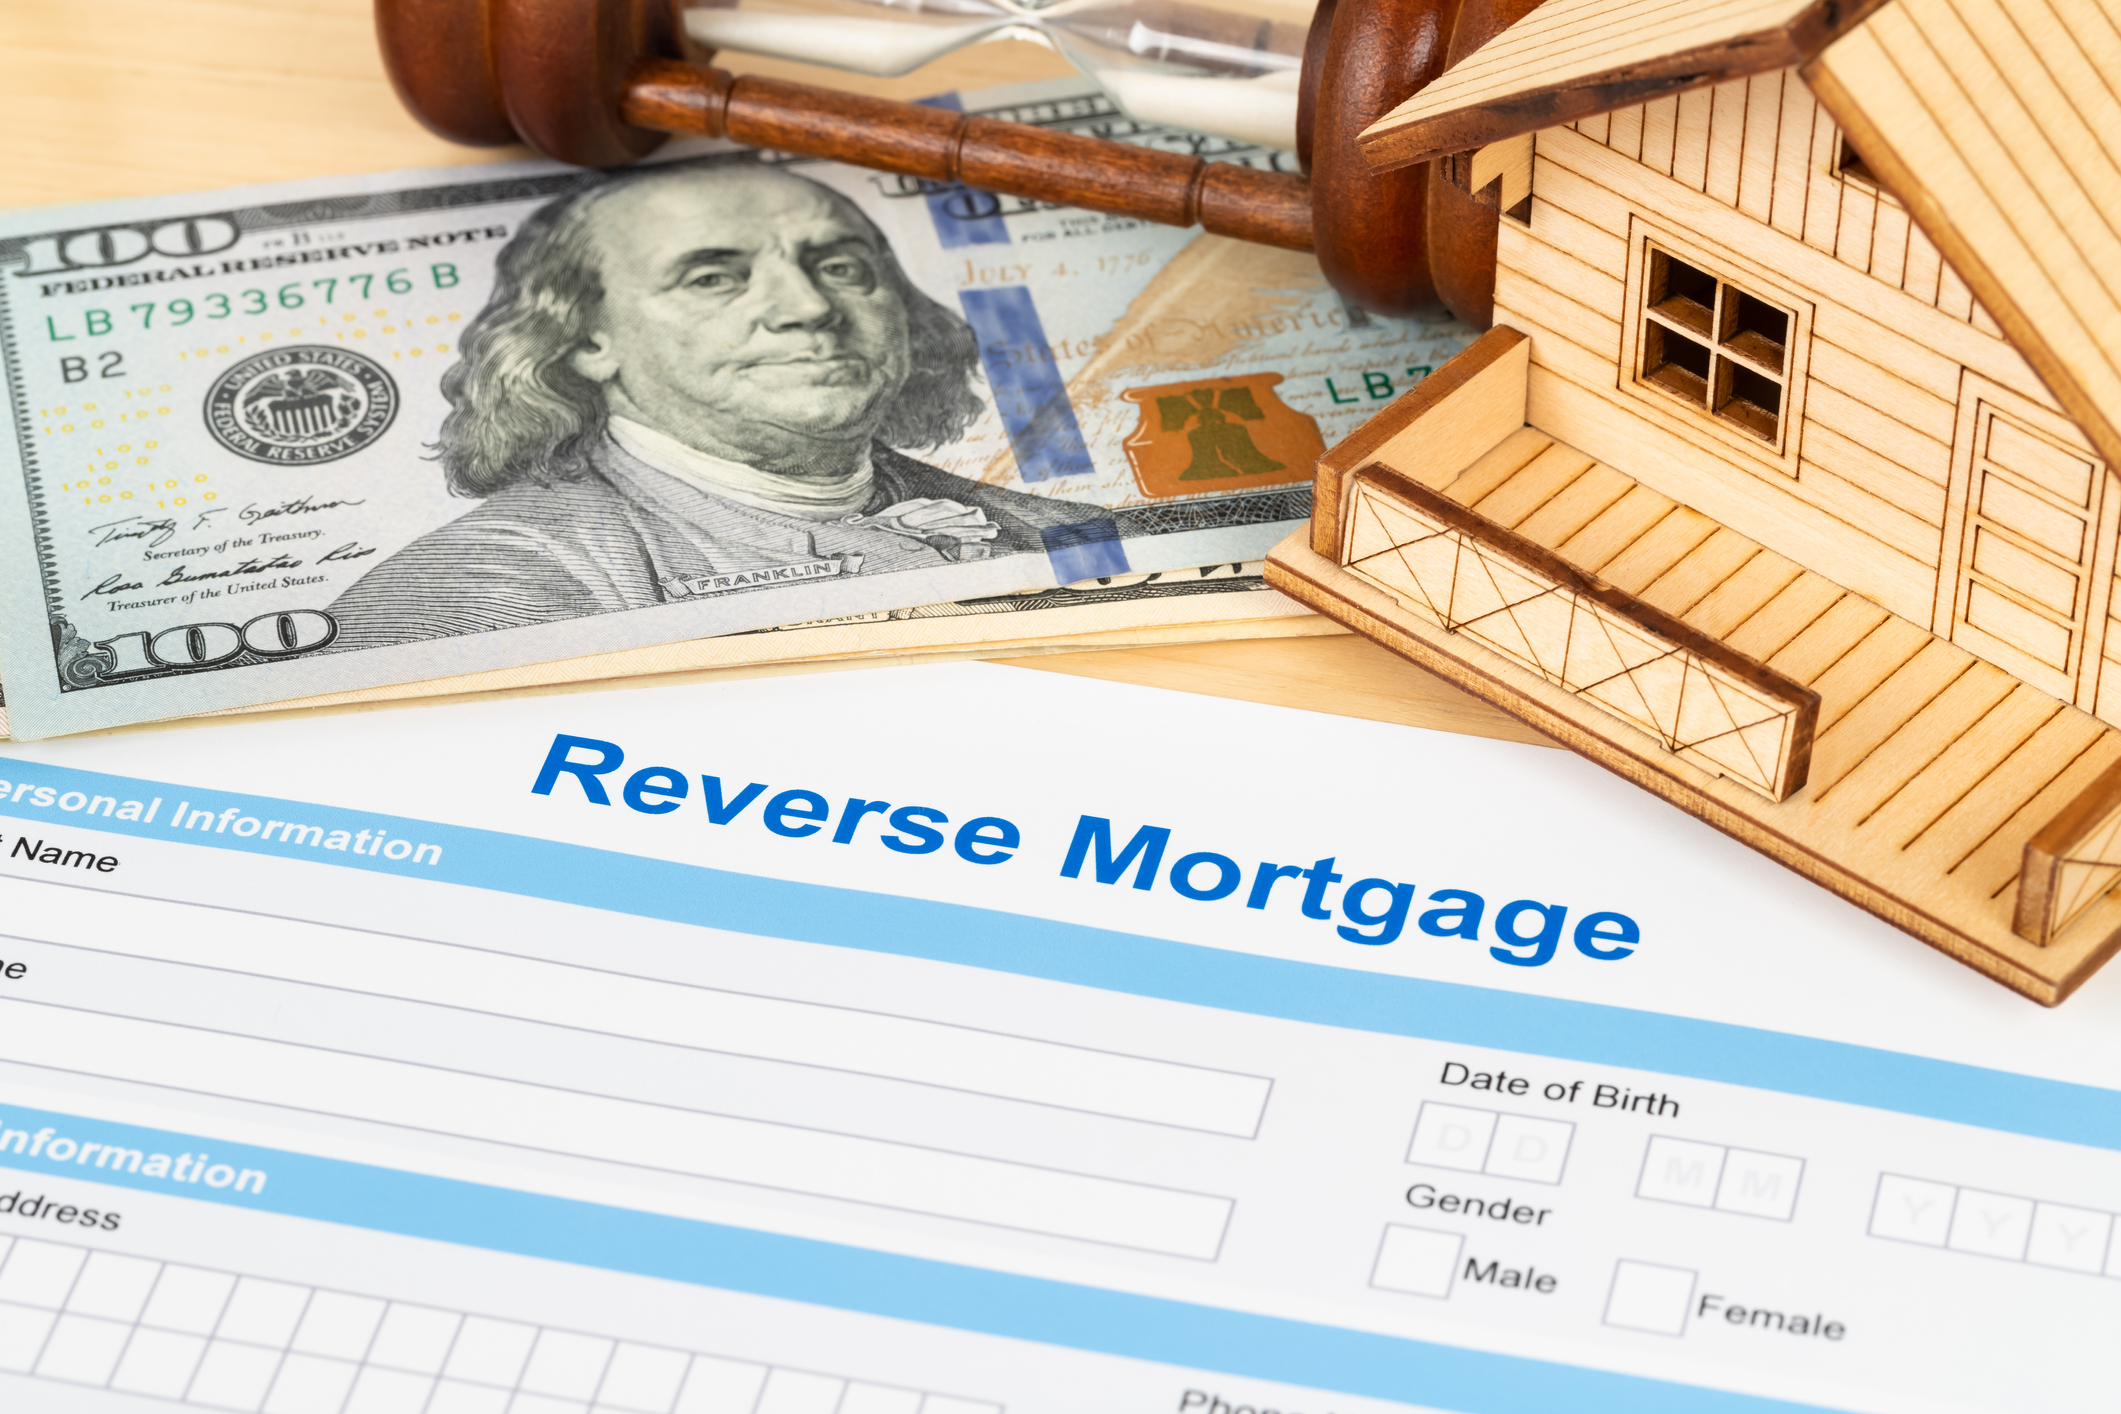 The Basic Questions About Reverse Mortgages | Florida Realtors